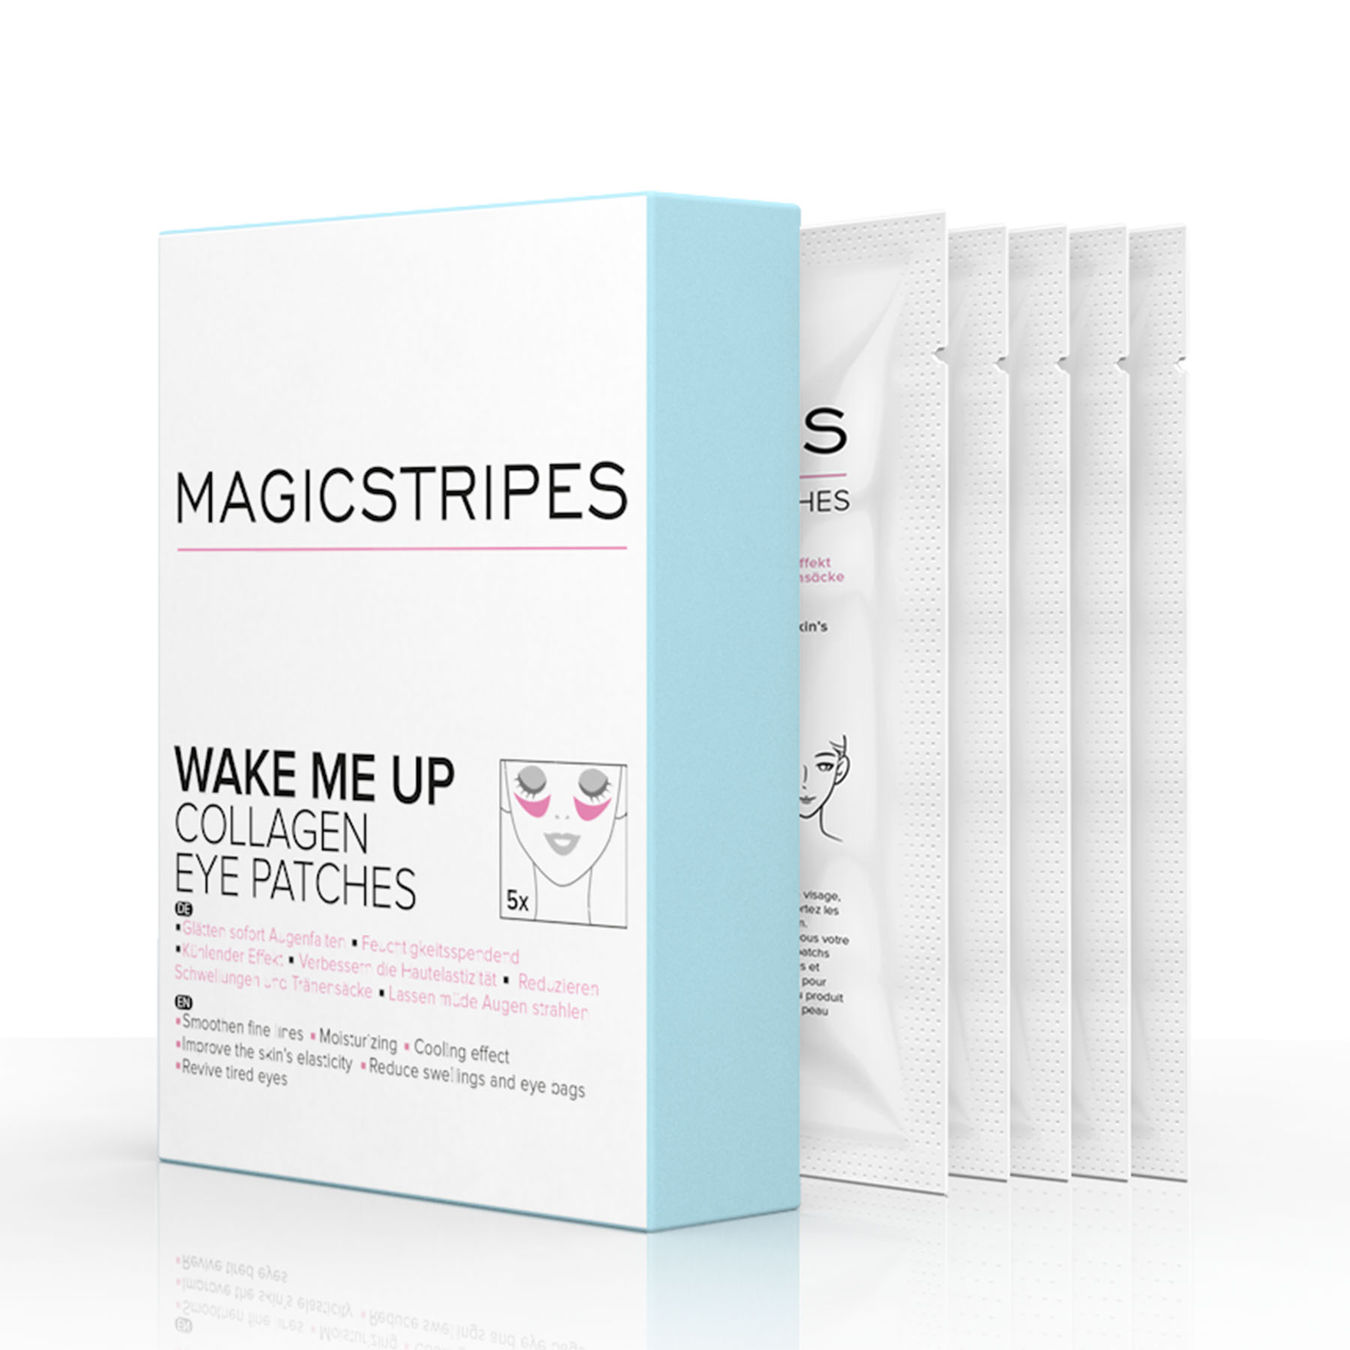 MAGICSTRIPES Wake Me Up Collagen Eye Patches Augenpatches 5PZ Uomo